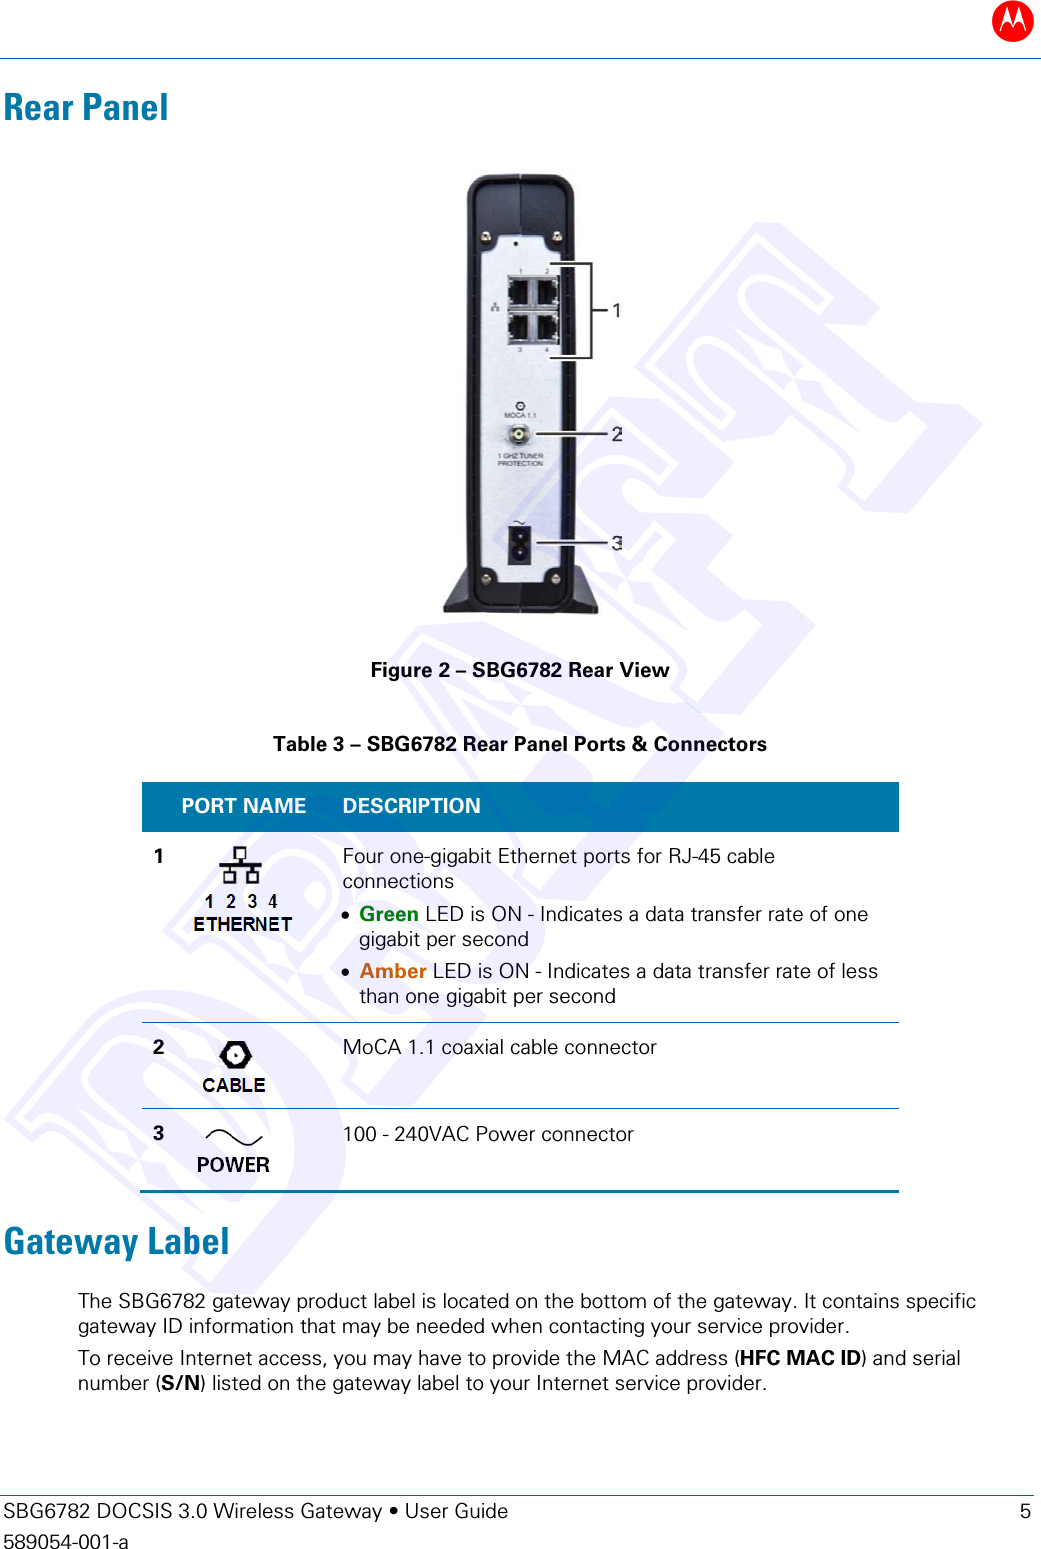 B   SBG6782 DOCSIS 3.0 Wireless Gateway • User Guide 5 589054-001-a                  Rear Panel  Figure 2 – SBG6782 Rear View  Table 3 – SBG6782 Rear Panel Ports &amp; Connectors      PORT NAME DESCRIPTION 1  Four one-gigabit Ethernet ports for RJ-45 cable connections • Green LED is ON - Indicates a data transfer rate of one gigabit per second • Amber LED is ON - Indicates a data transfer rate of less than one gigabit per second 2  MoCA 1.1 coaxial cable connector 3  100 - 240VAC Power connector Gateway Label The SBG6782 gateway product label is located on the bottom of the gateway. It contains specific gateway ID information that may be needed when contacting your service provider.  To receive Internet access, you may have to provide the MAC address (HFC MAC ID) and serial number (S/N) listed on the gateway label to your Internet service provider.  DRAFT